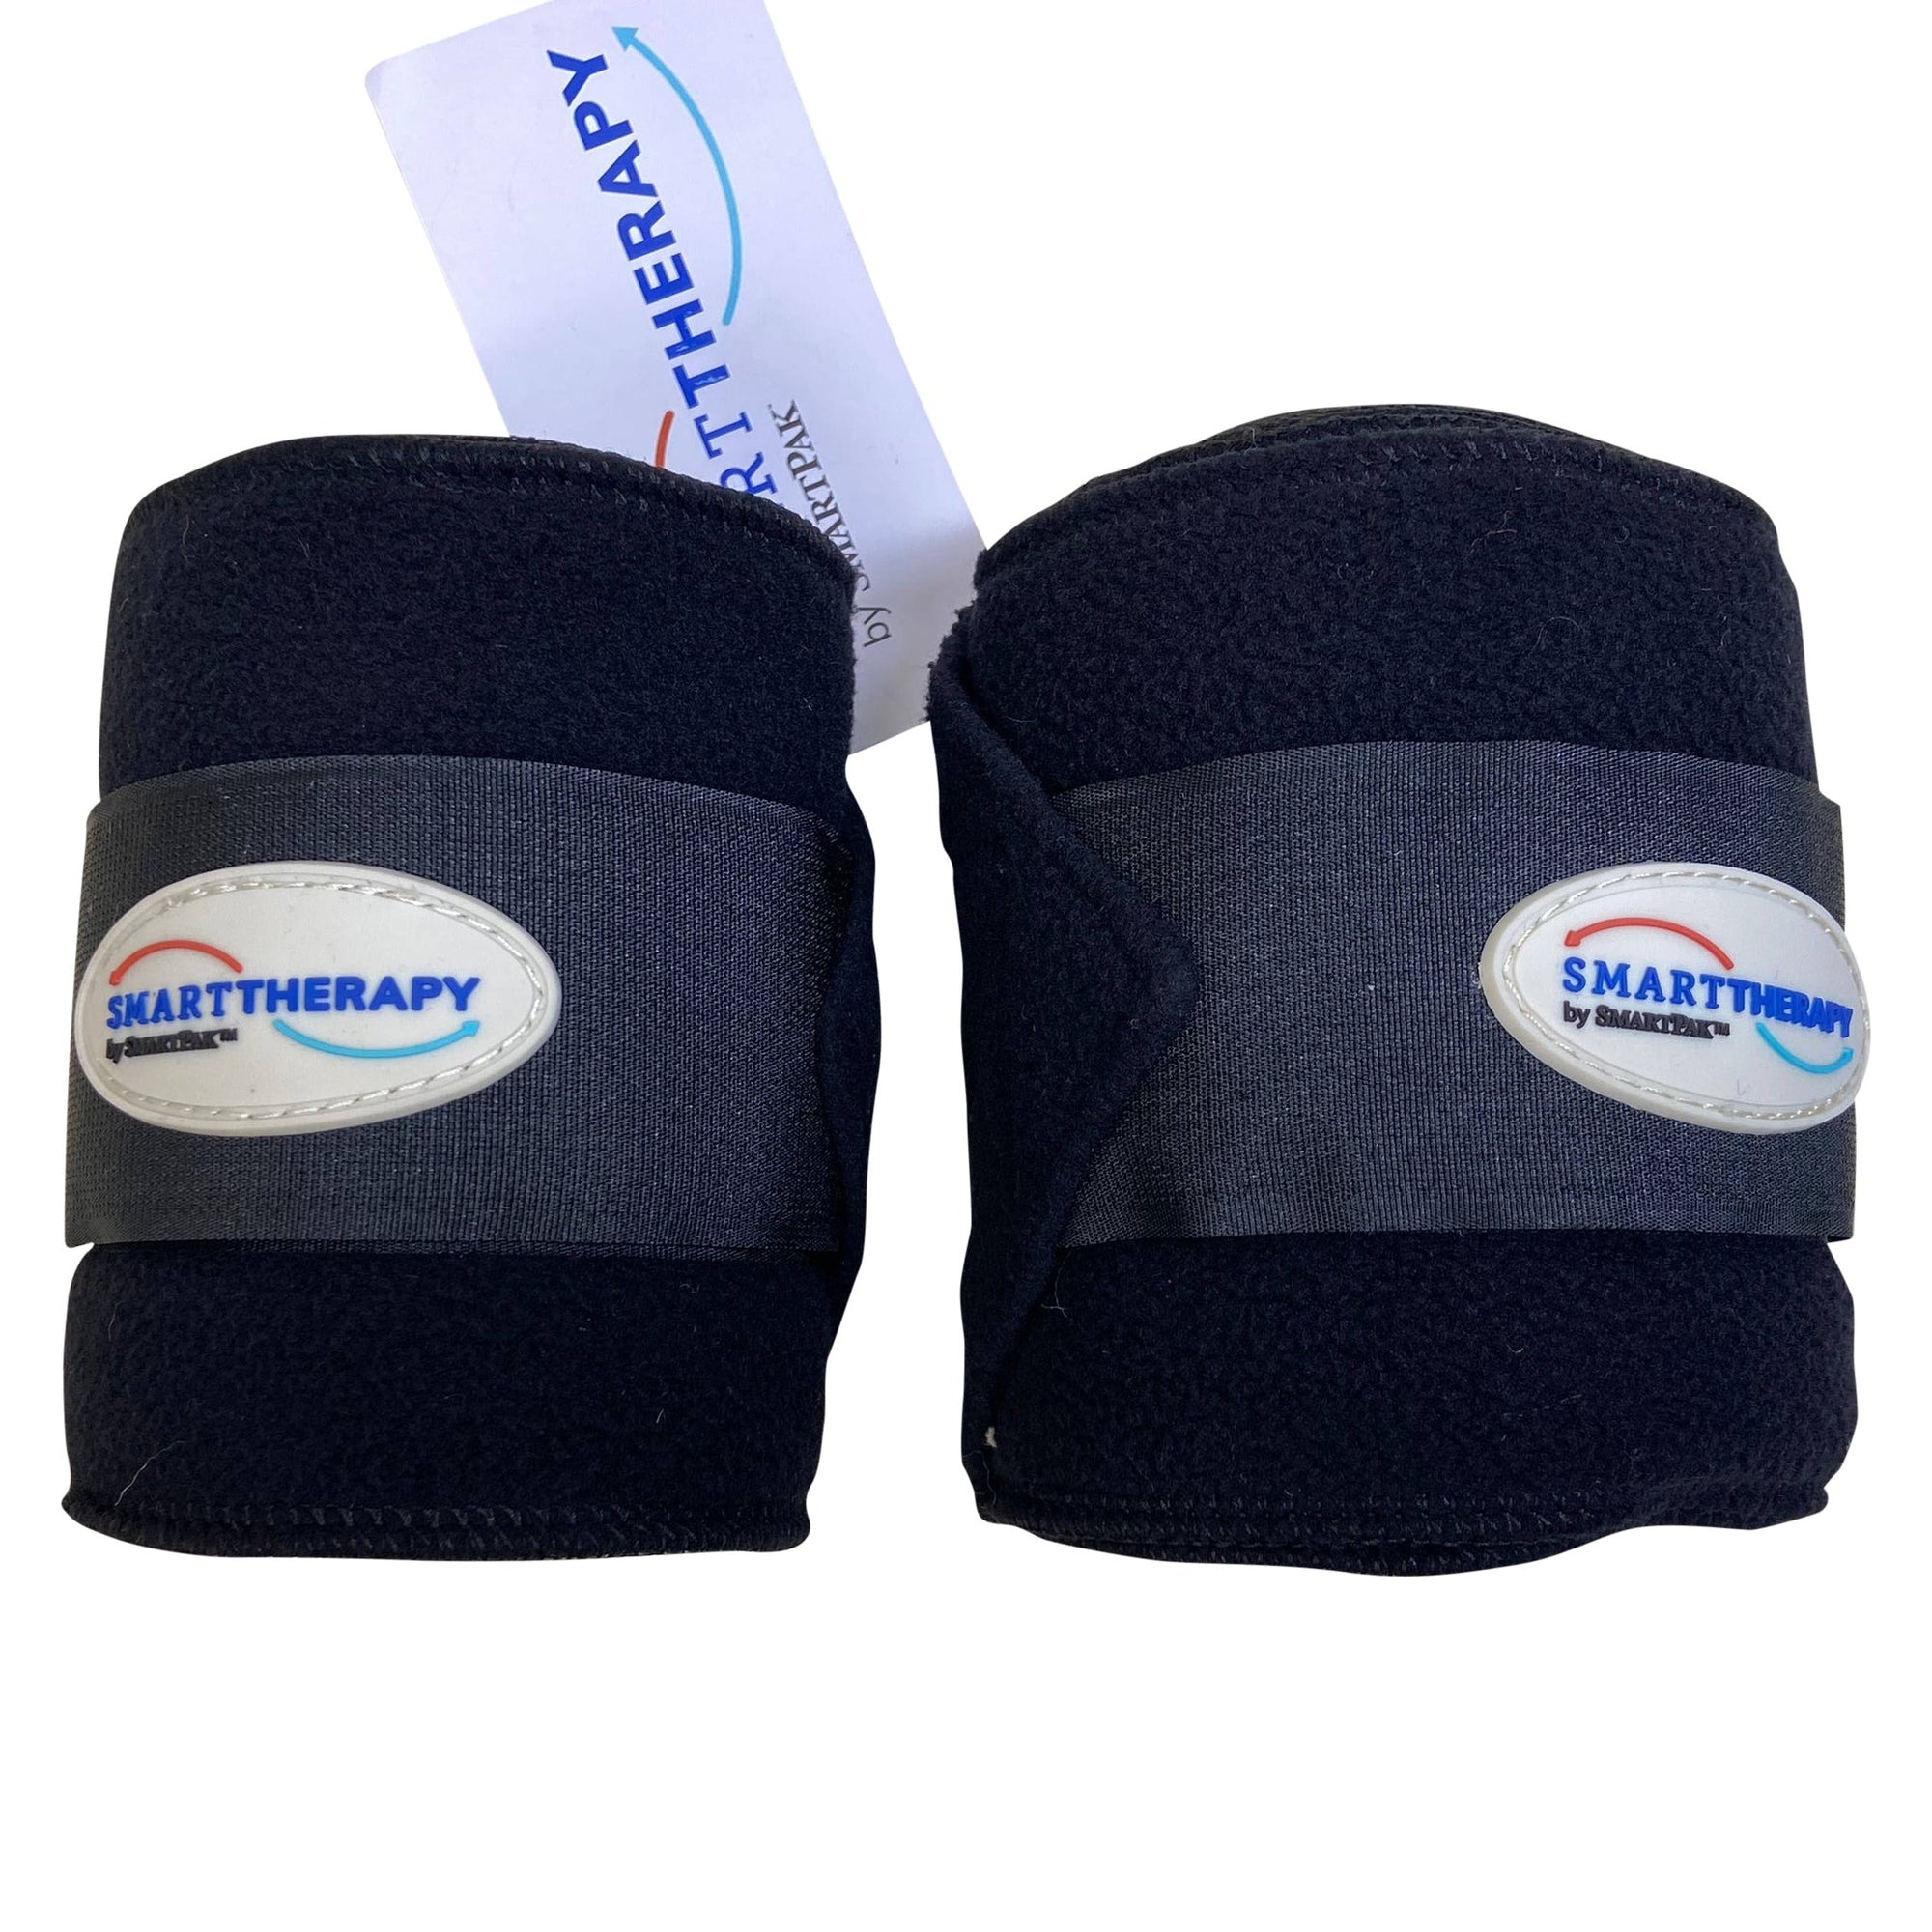 Smartpak 'SmartTherapy ThermoBalance' Polo Wraps in Black